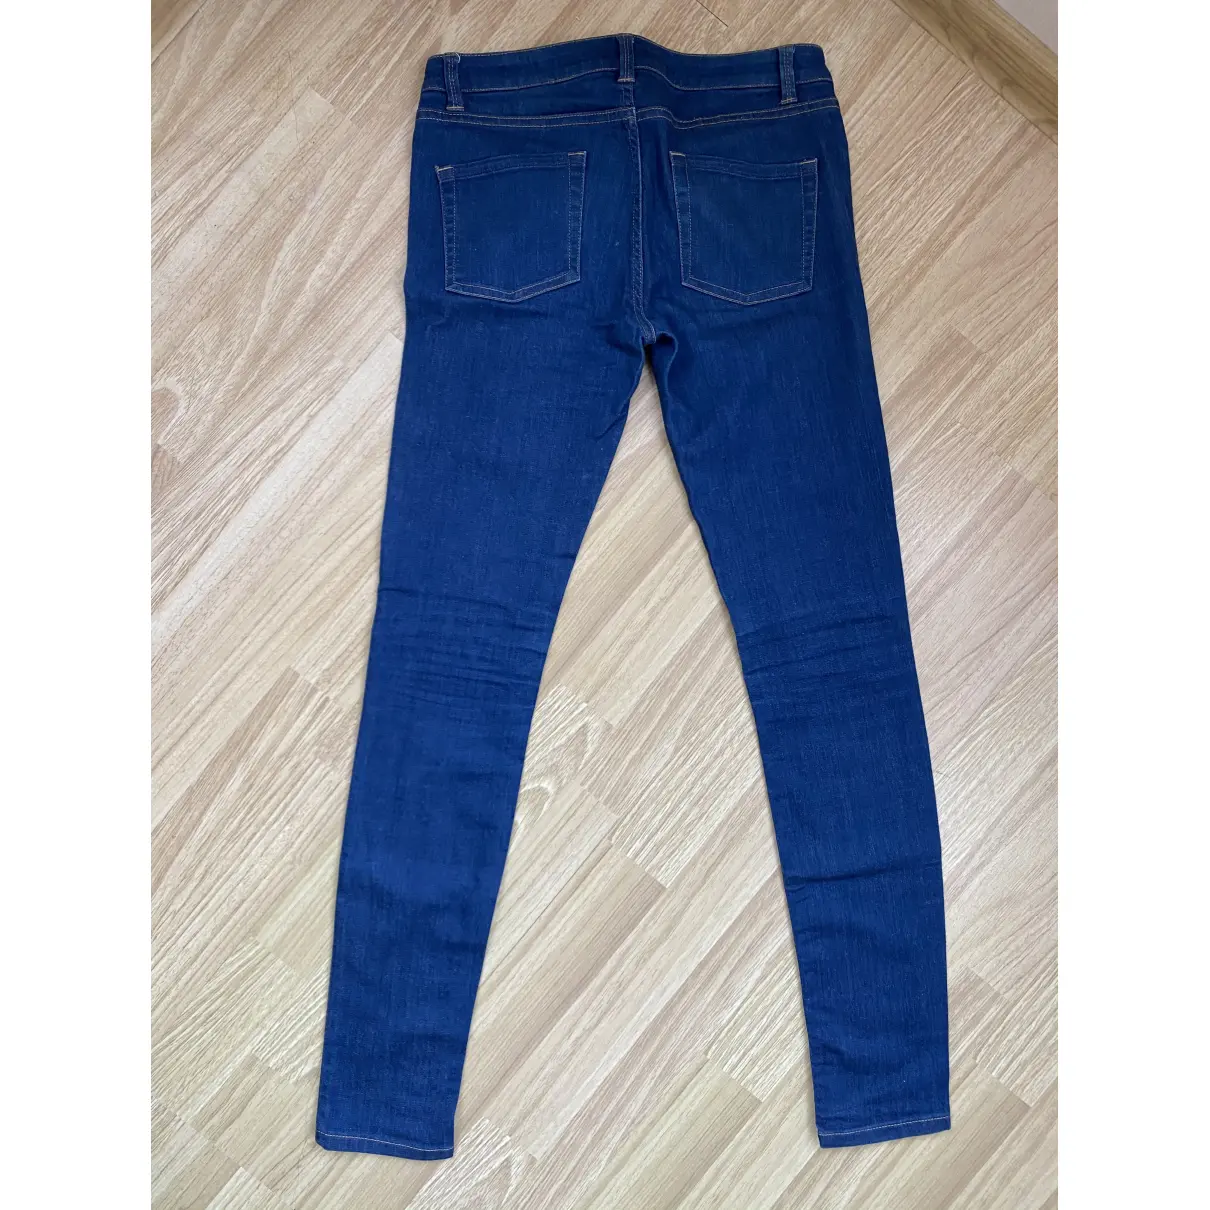 Buy Marc by Marc Jacobs Slim jeans online